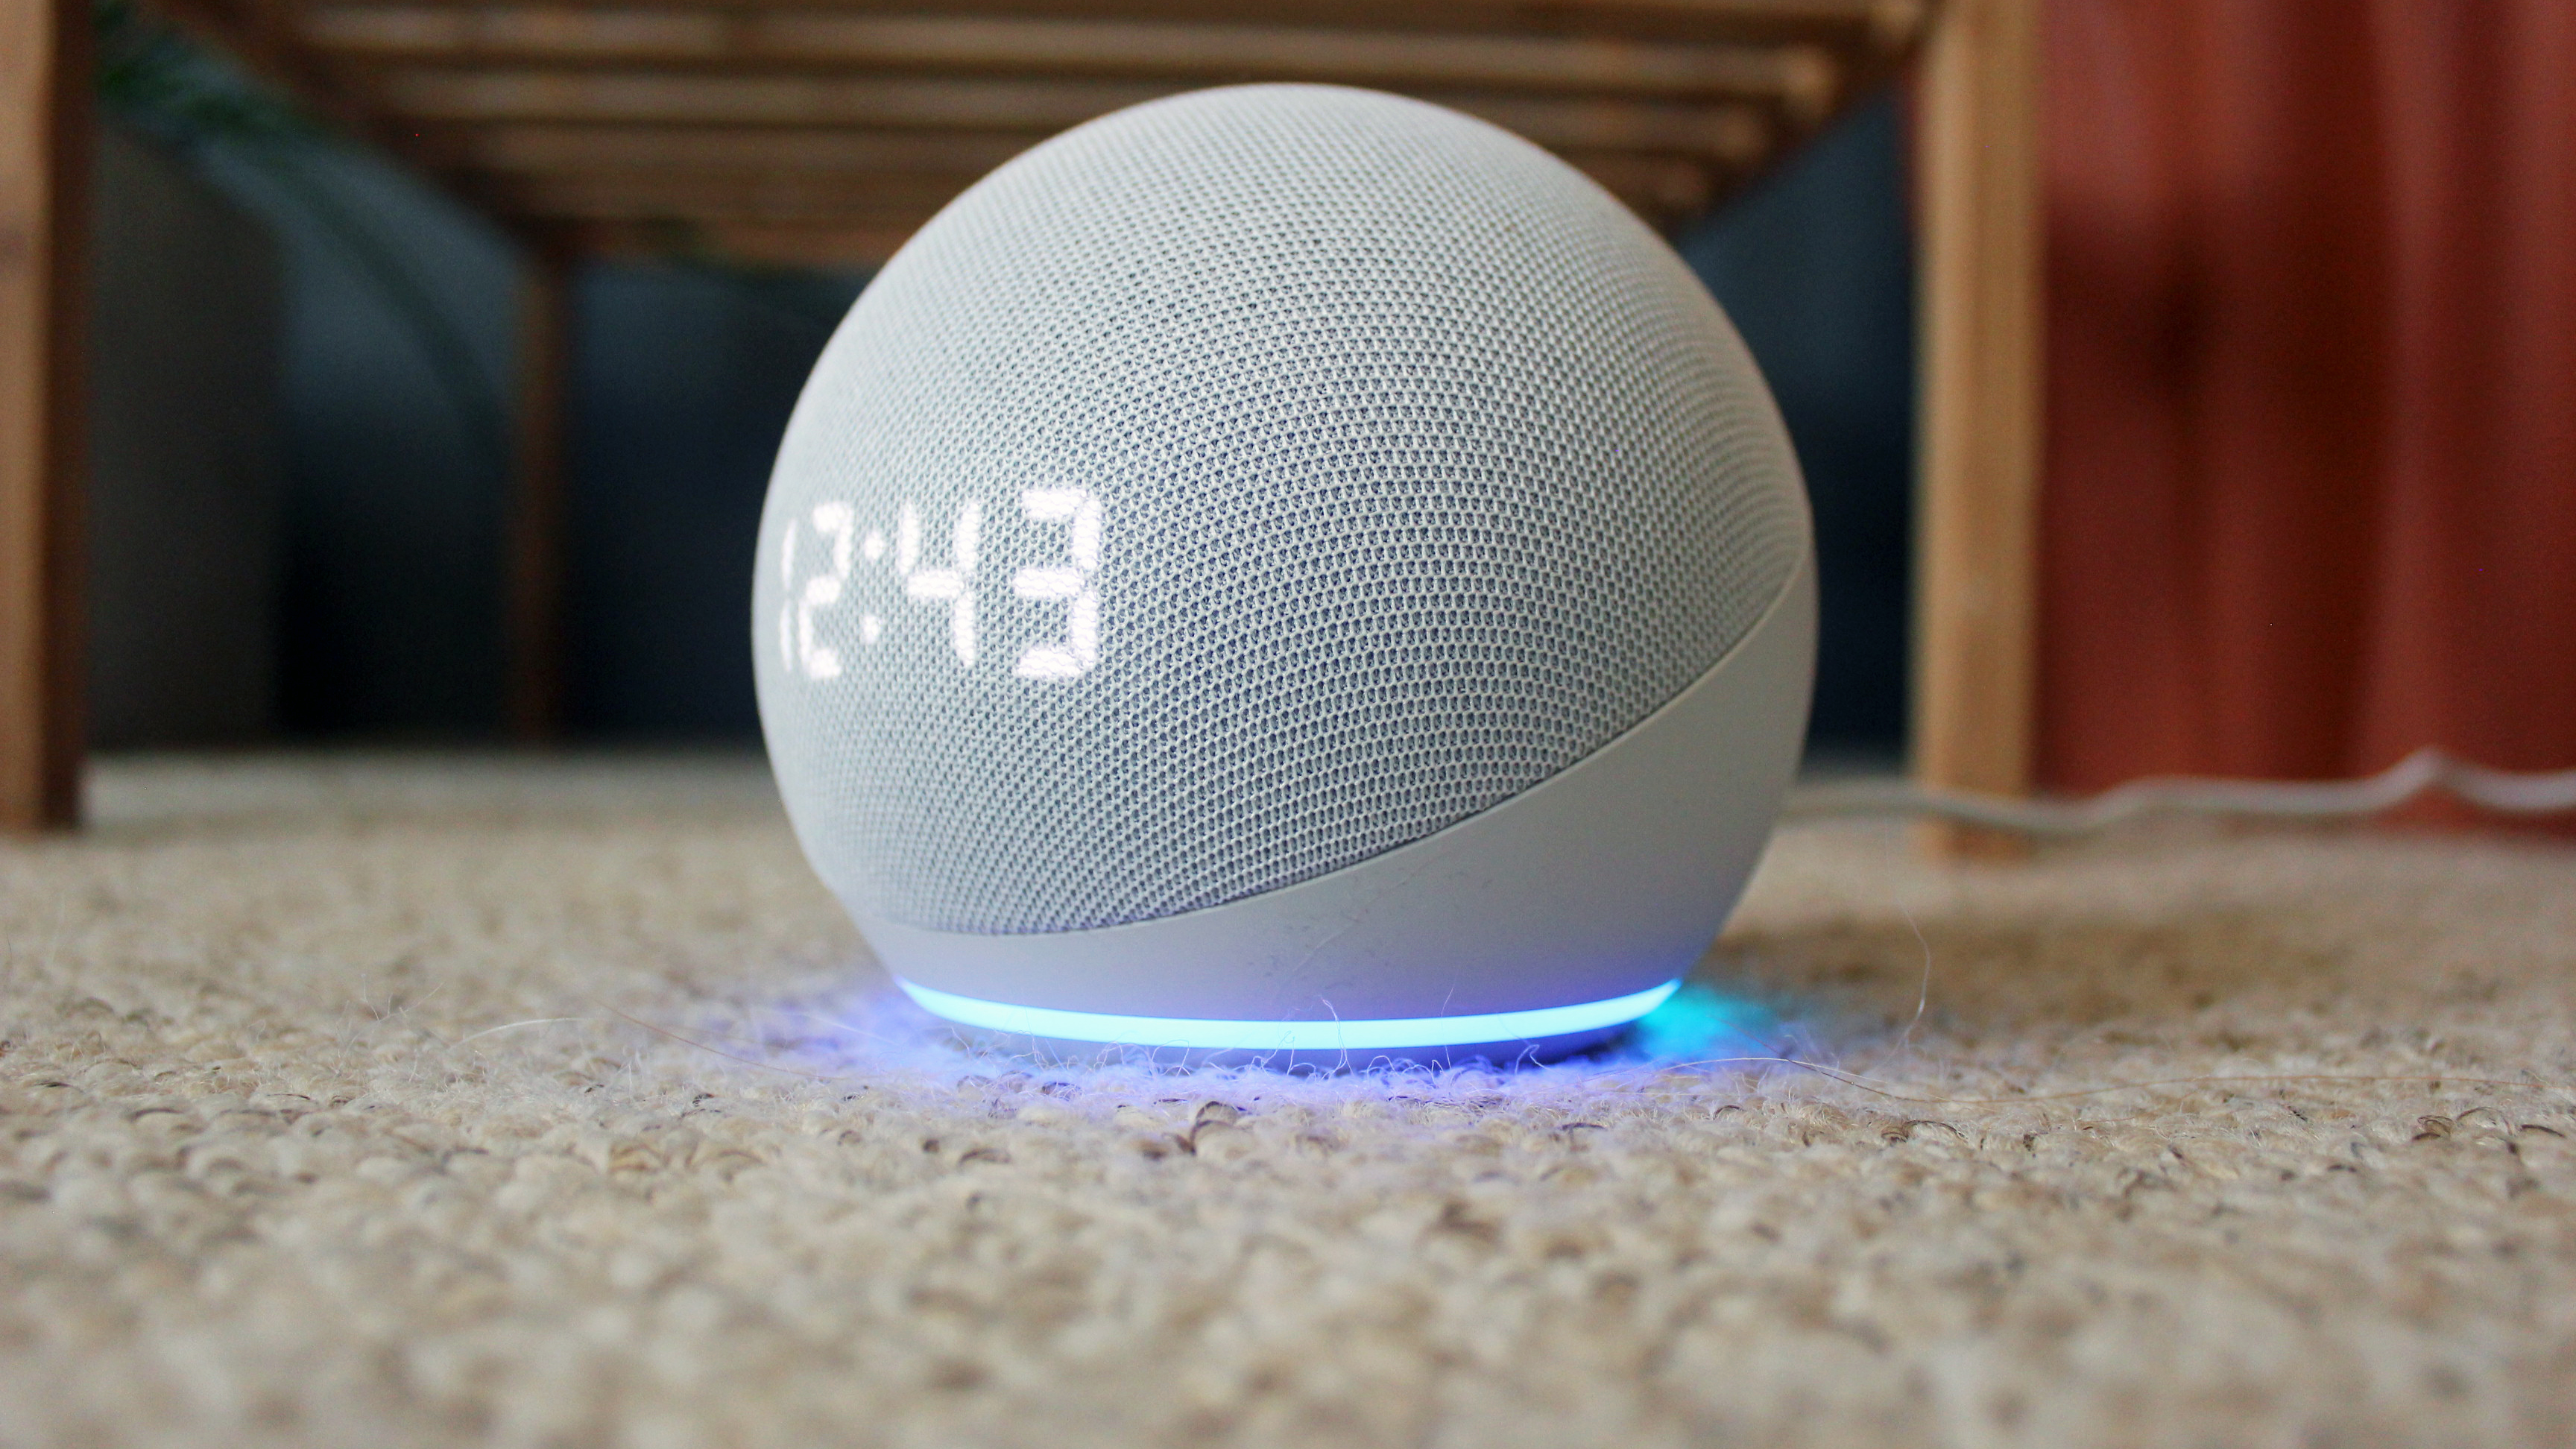 amazon echo dot with clock 2020 on a carpet